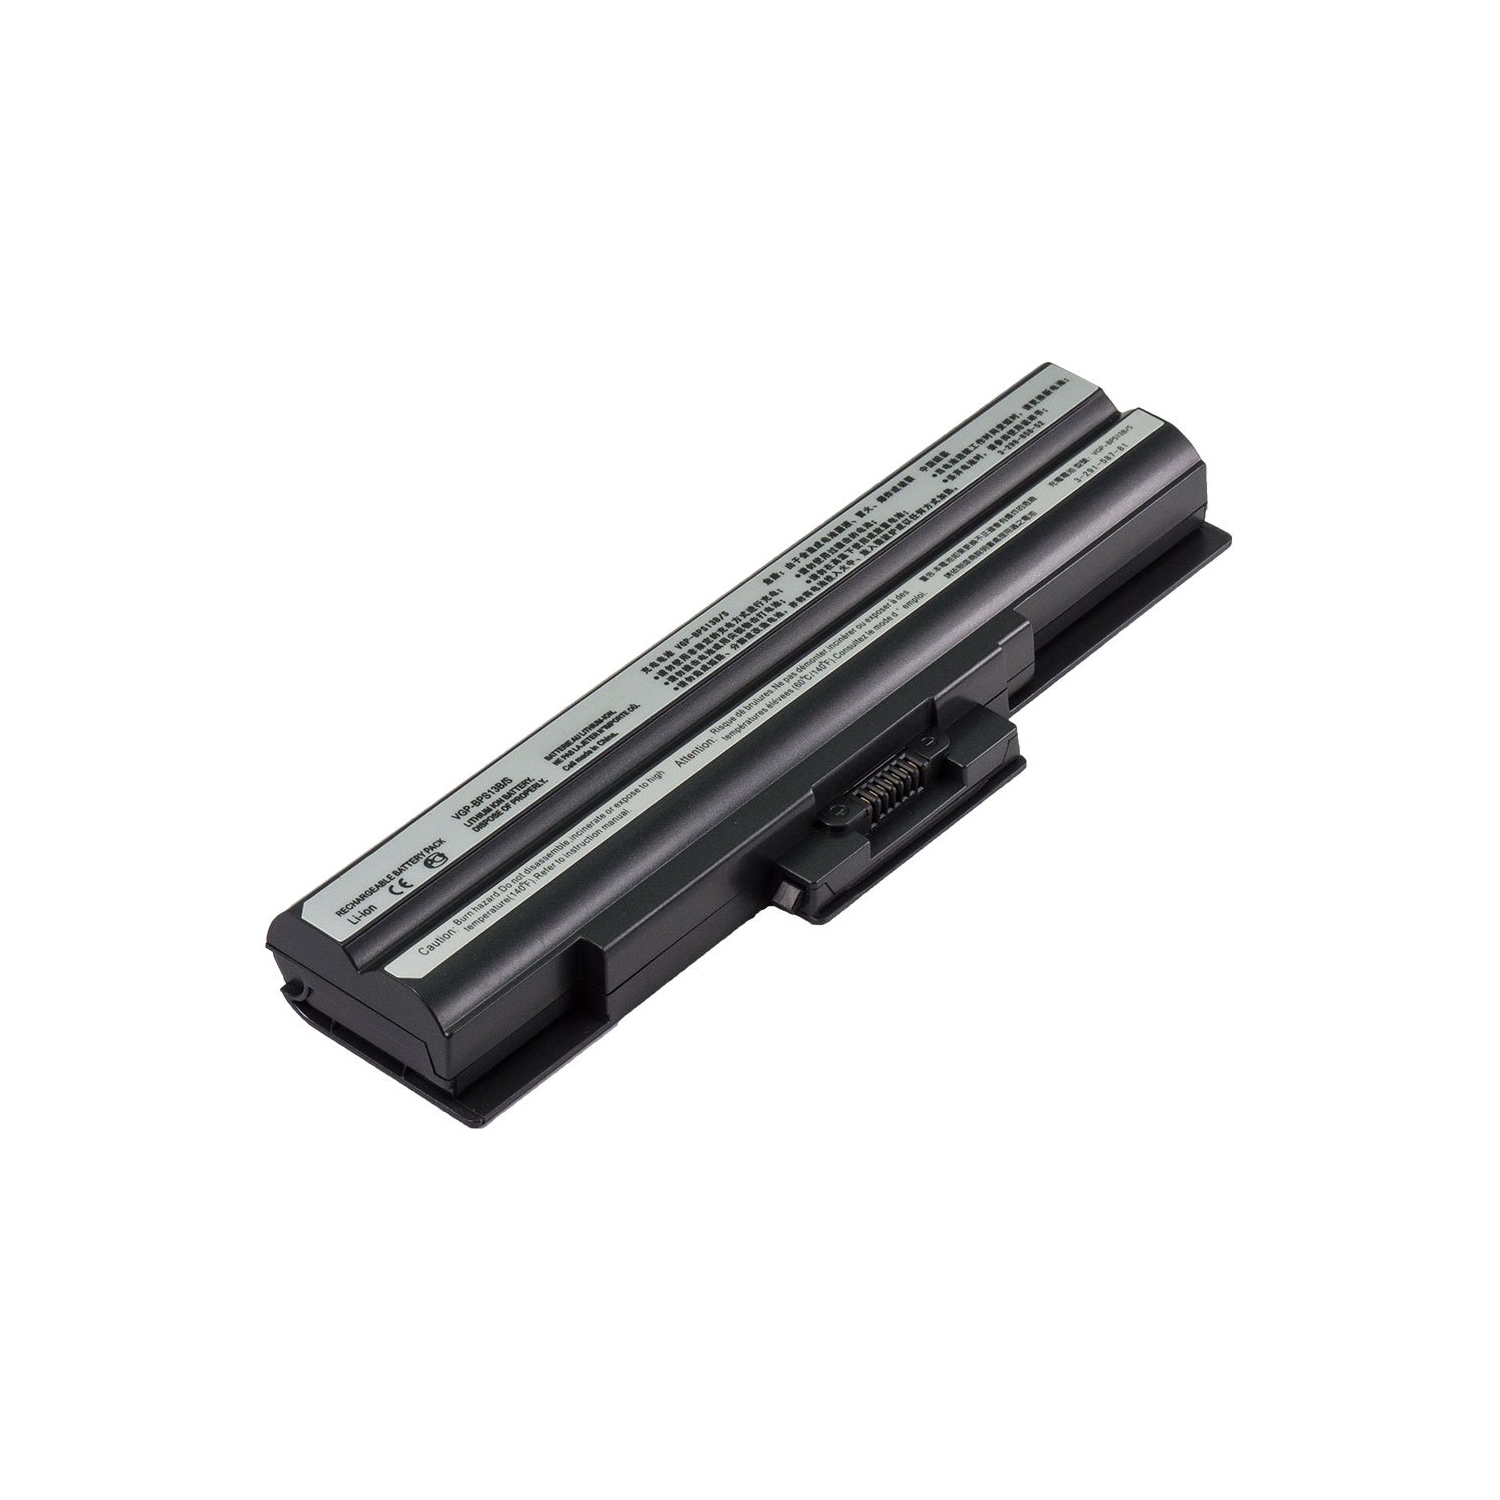 Laptop Battery Replacement for Sony VAIO VGN-FW139E, VGP-BPS13, VGP-BPS13/S, VGP-BPS13A/Q, VGP-BPS13B/B, VGP-BSP13/S